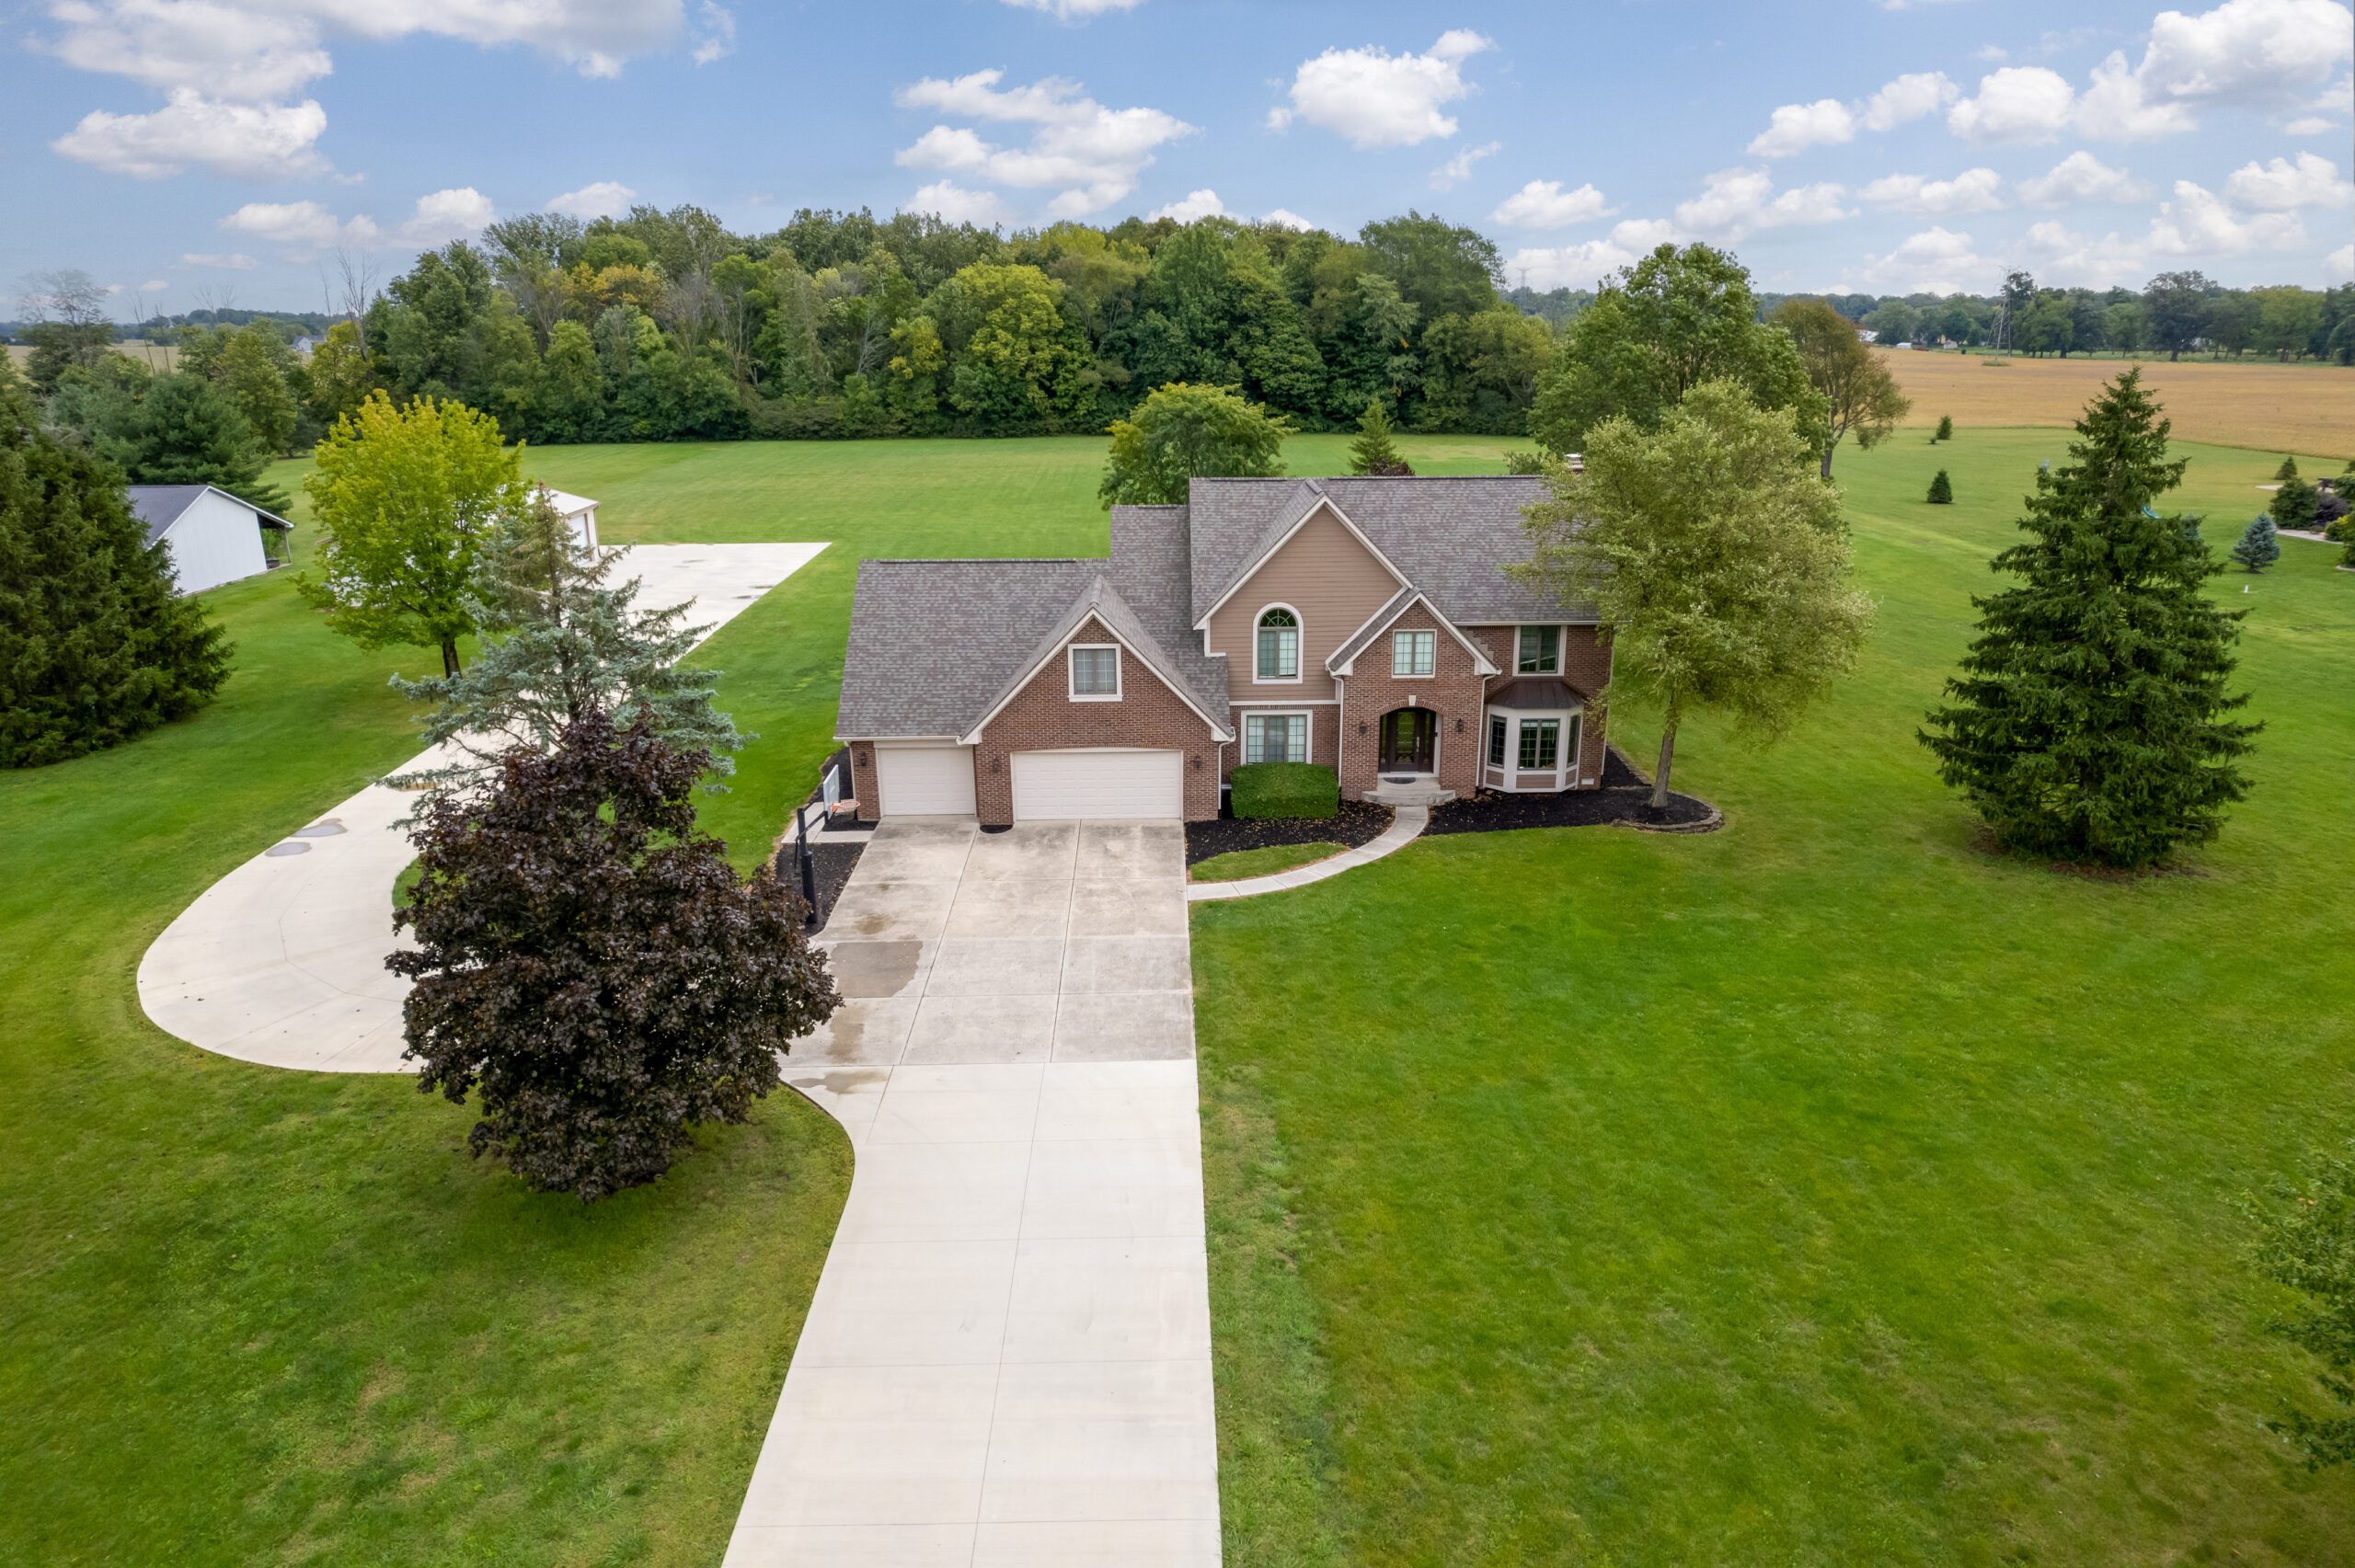 Aerial view of a home in the country on a large lot.